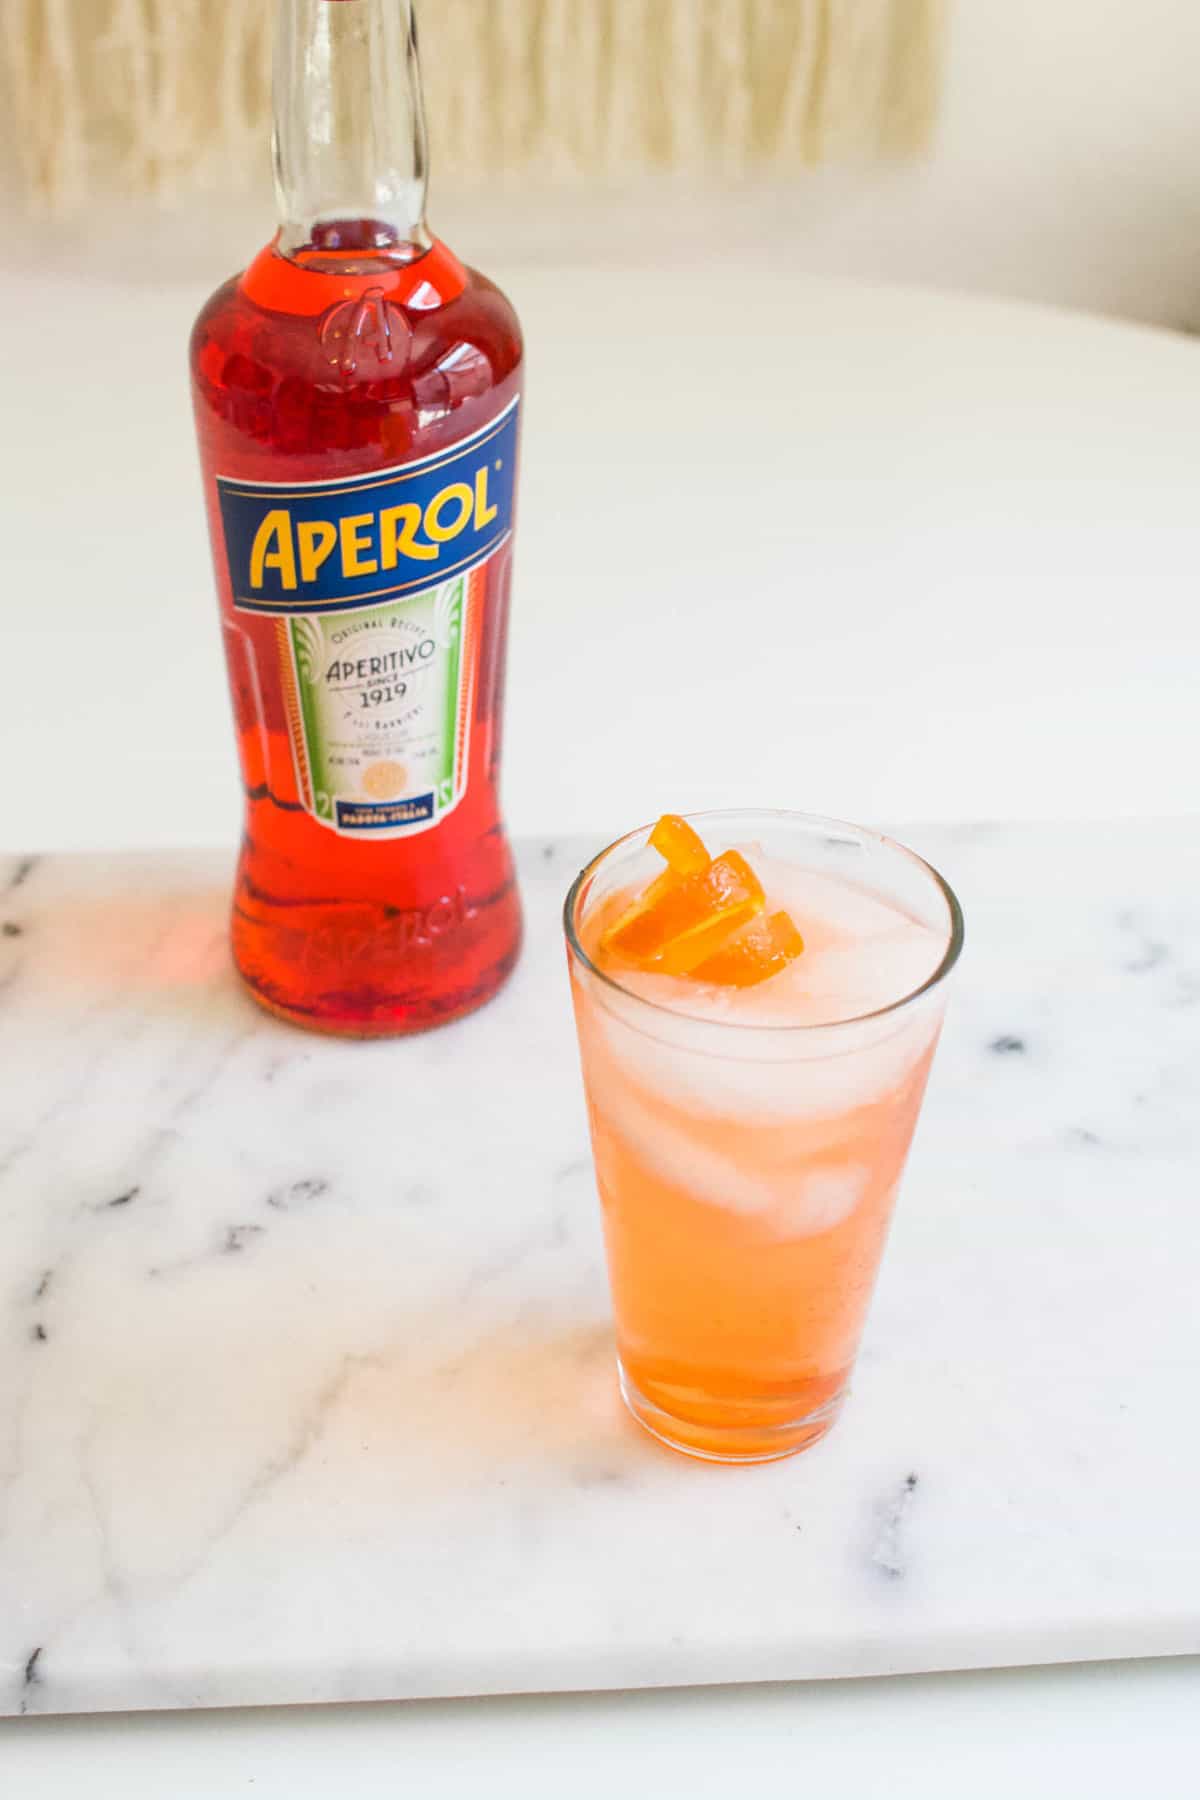 Orange peel spiral garnished cocktail on a table next to a bottle of Aperol.